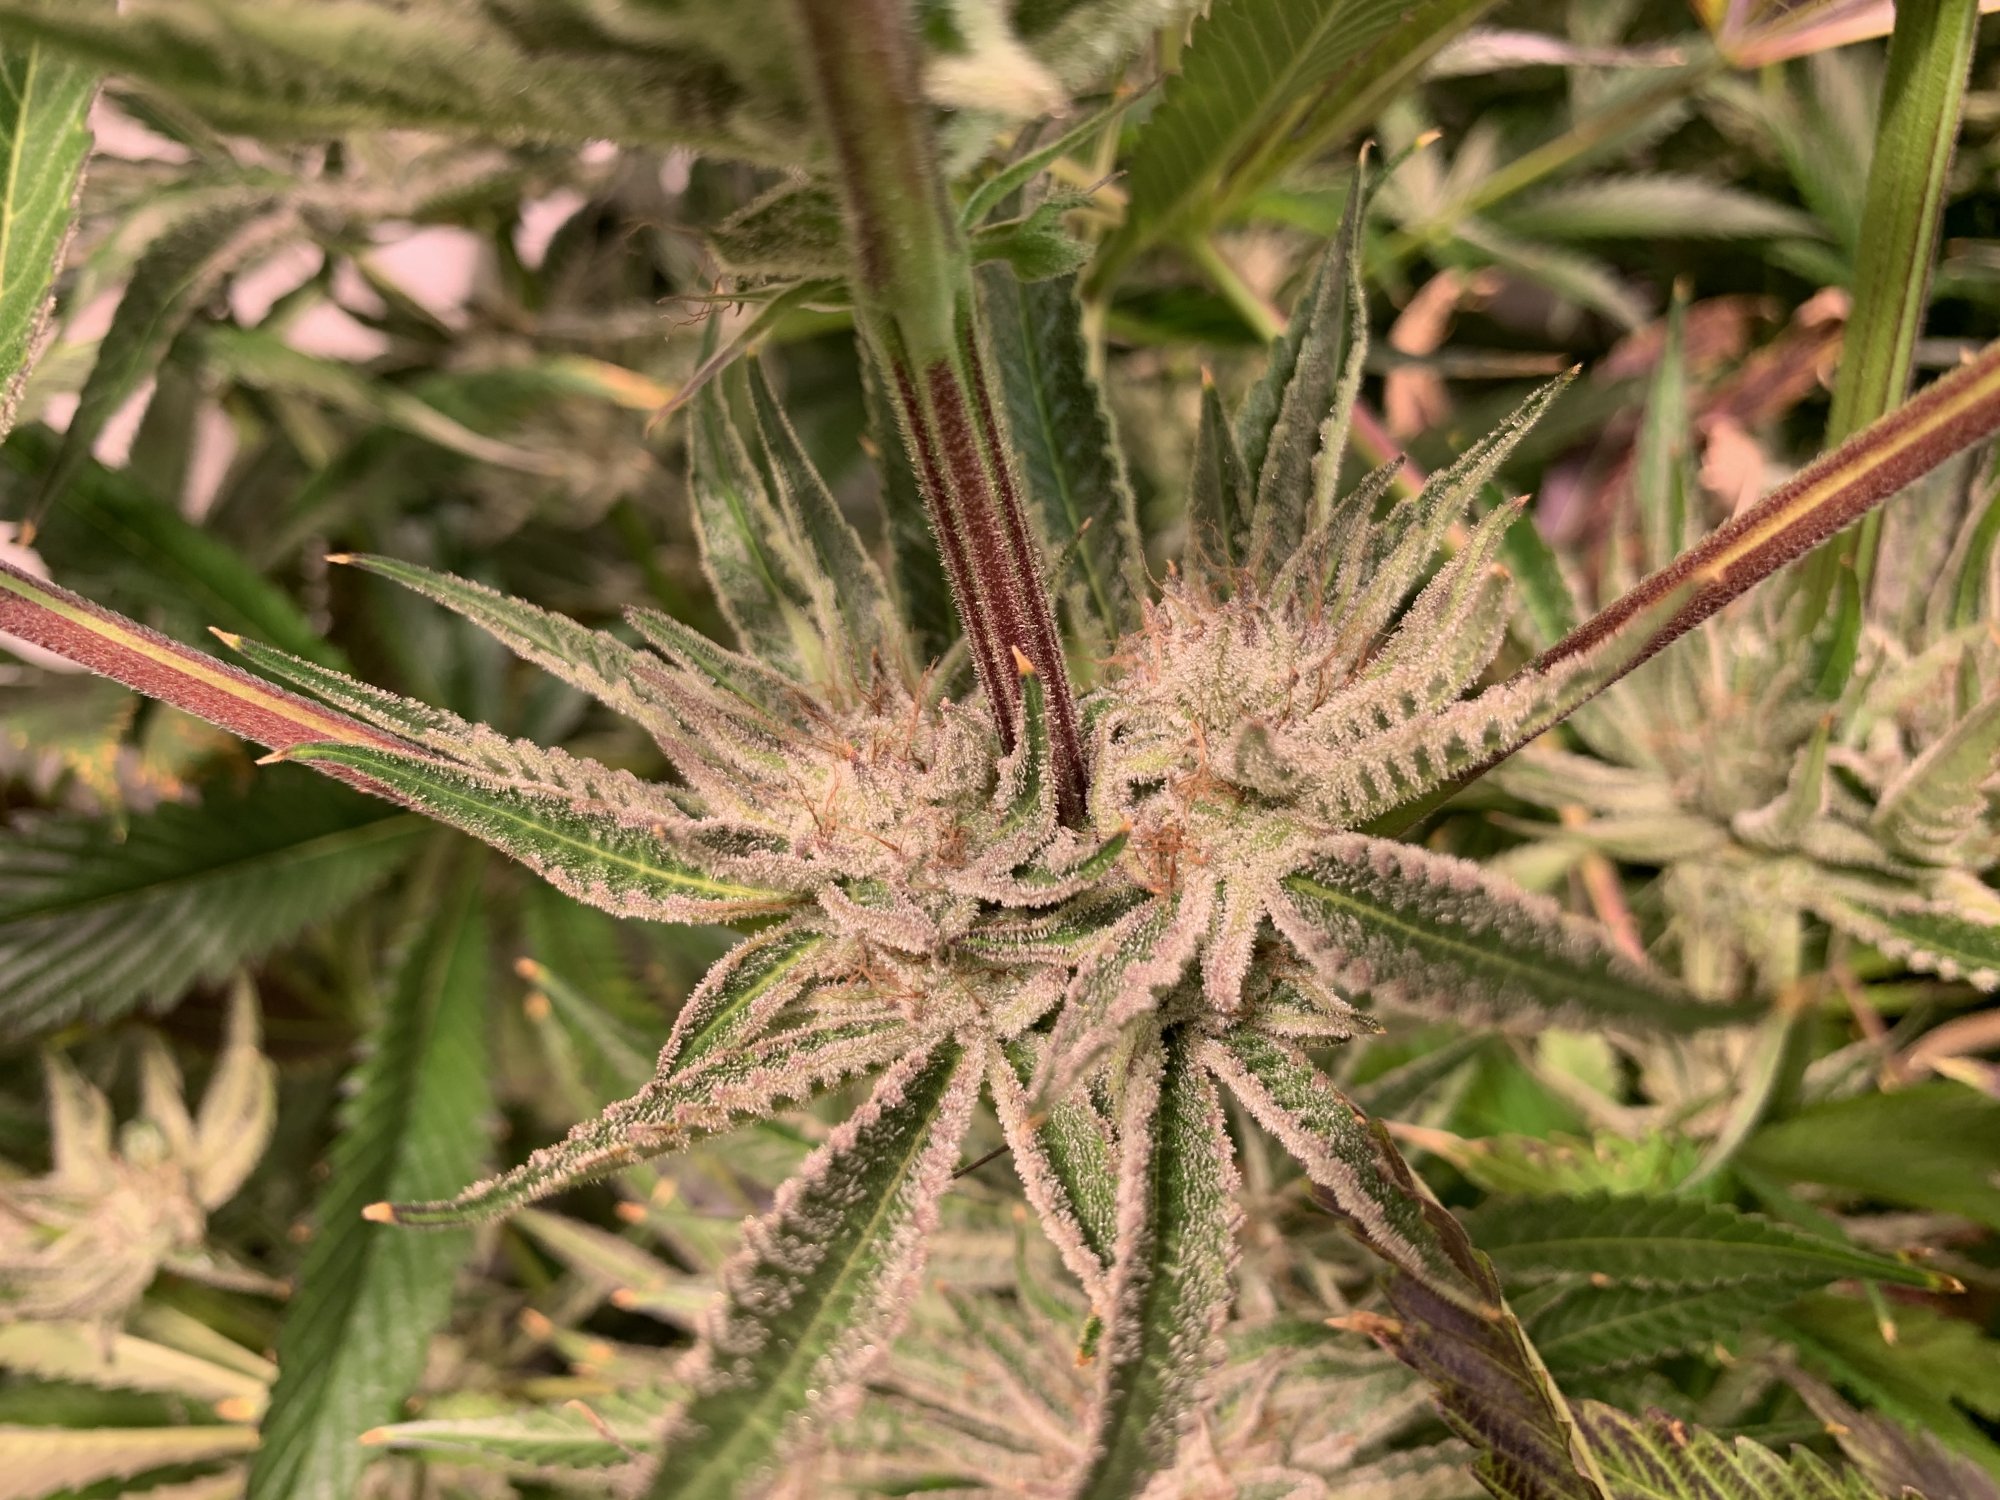 Need advice on cause for poor bud sizedevelopment 5